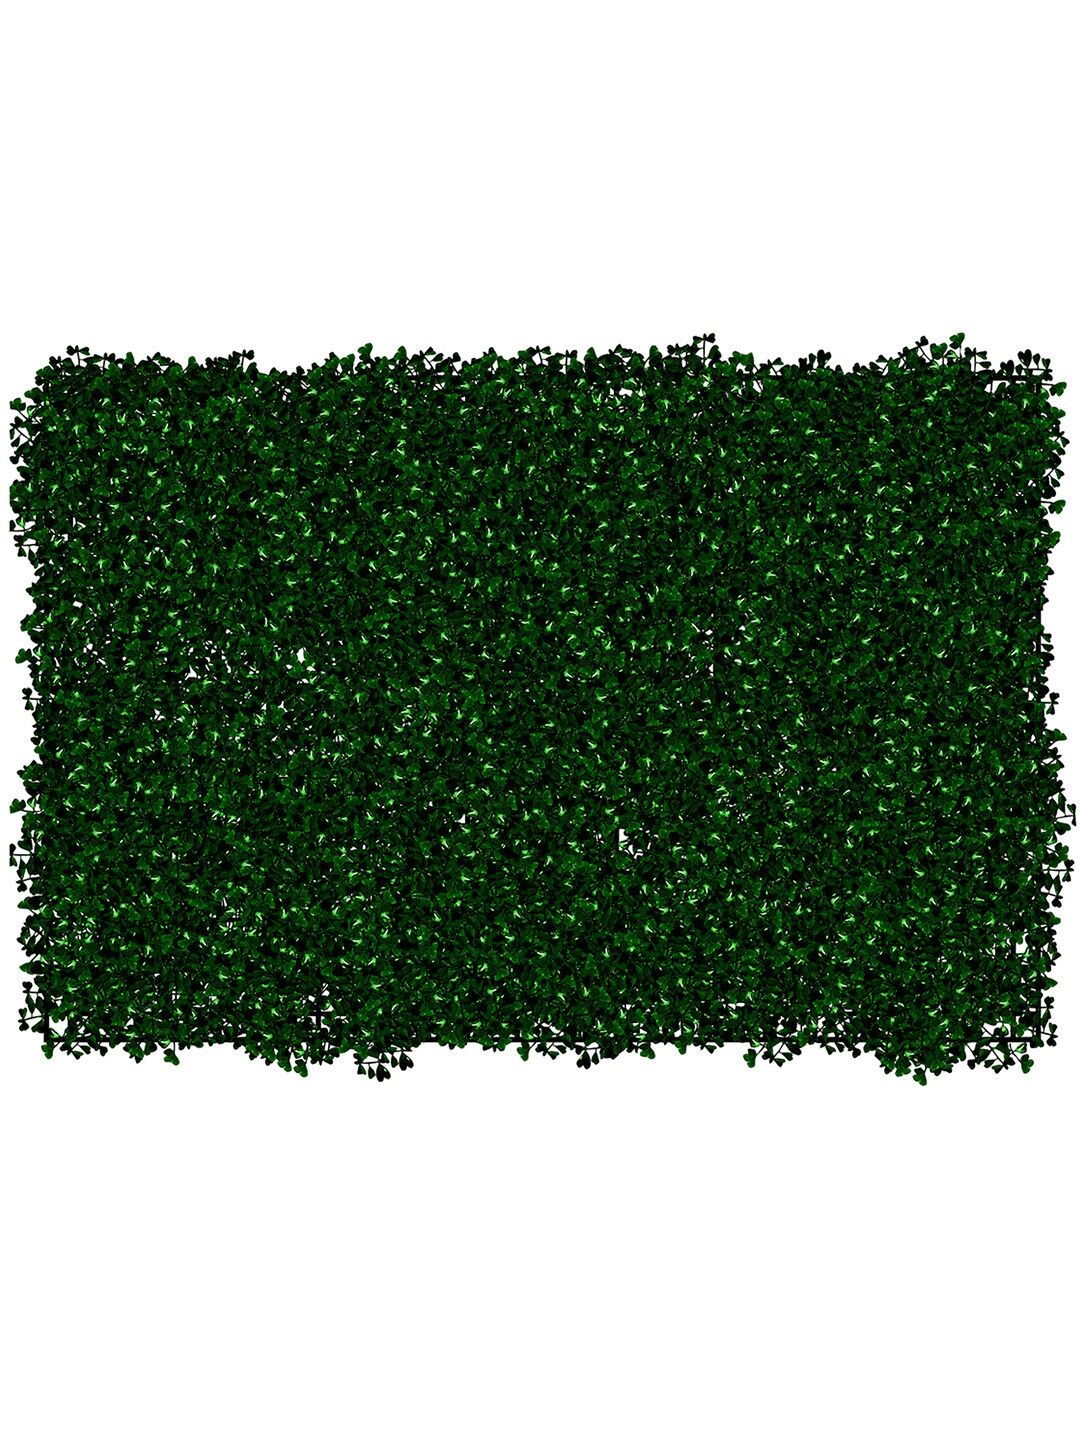 Story@home Green Artificial Grass Mat for Walls & Ceilings Price in India